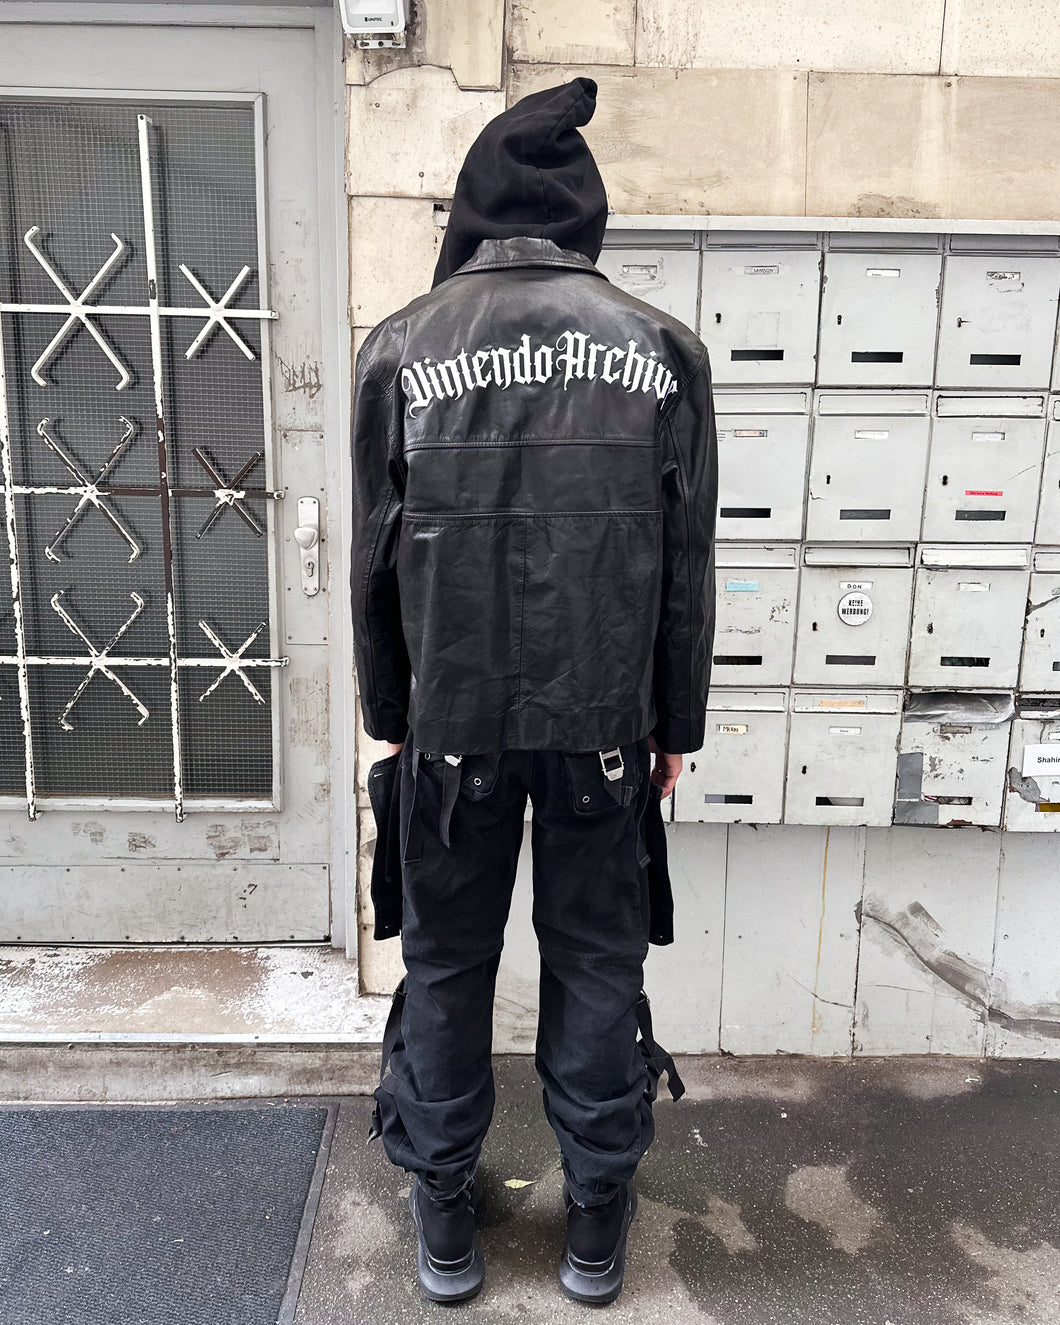 COMING SOON 24.11. - VINTENDO ARCHIVE - V1 LEATHER JACKET